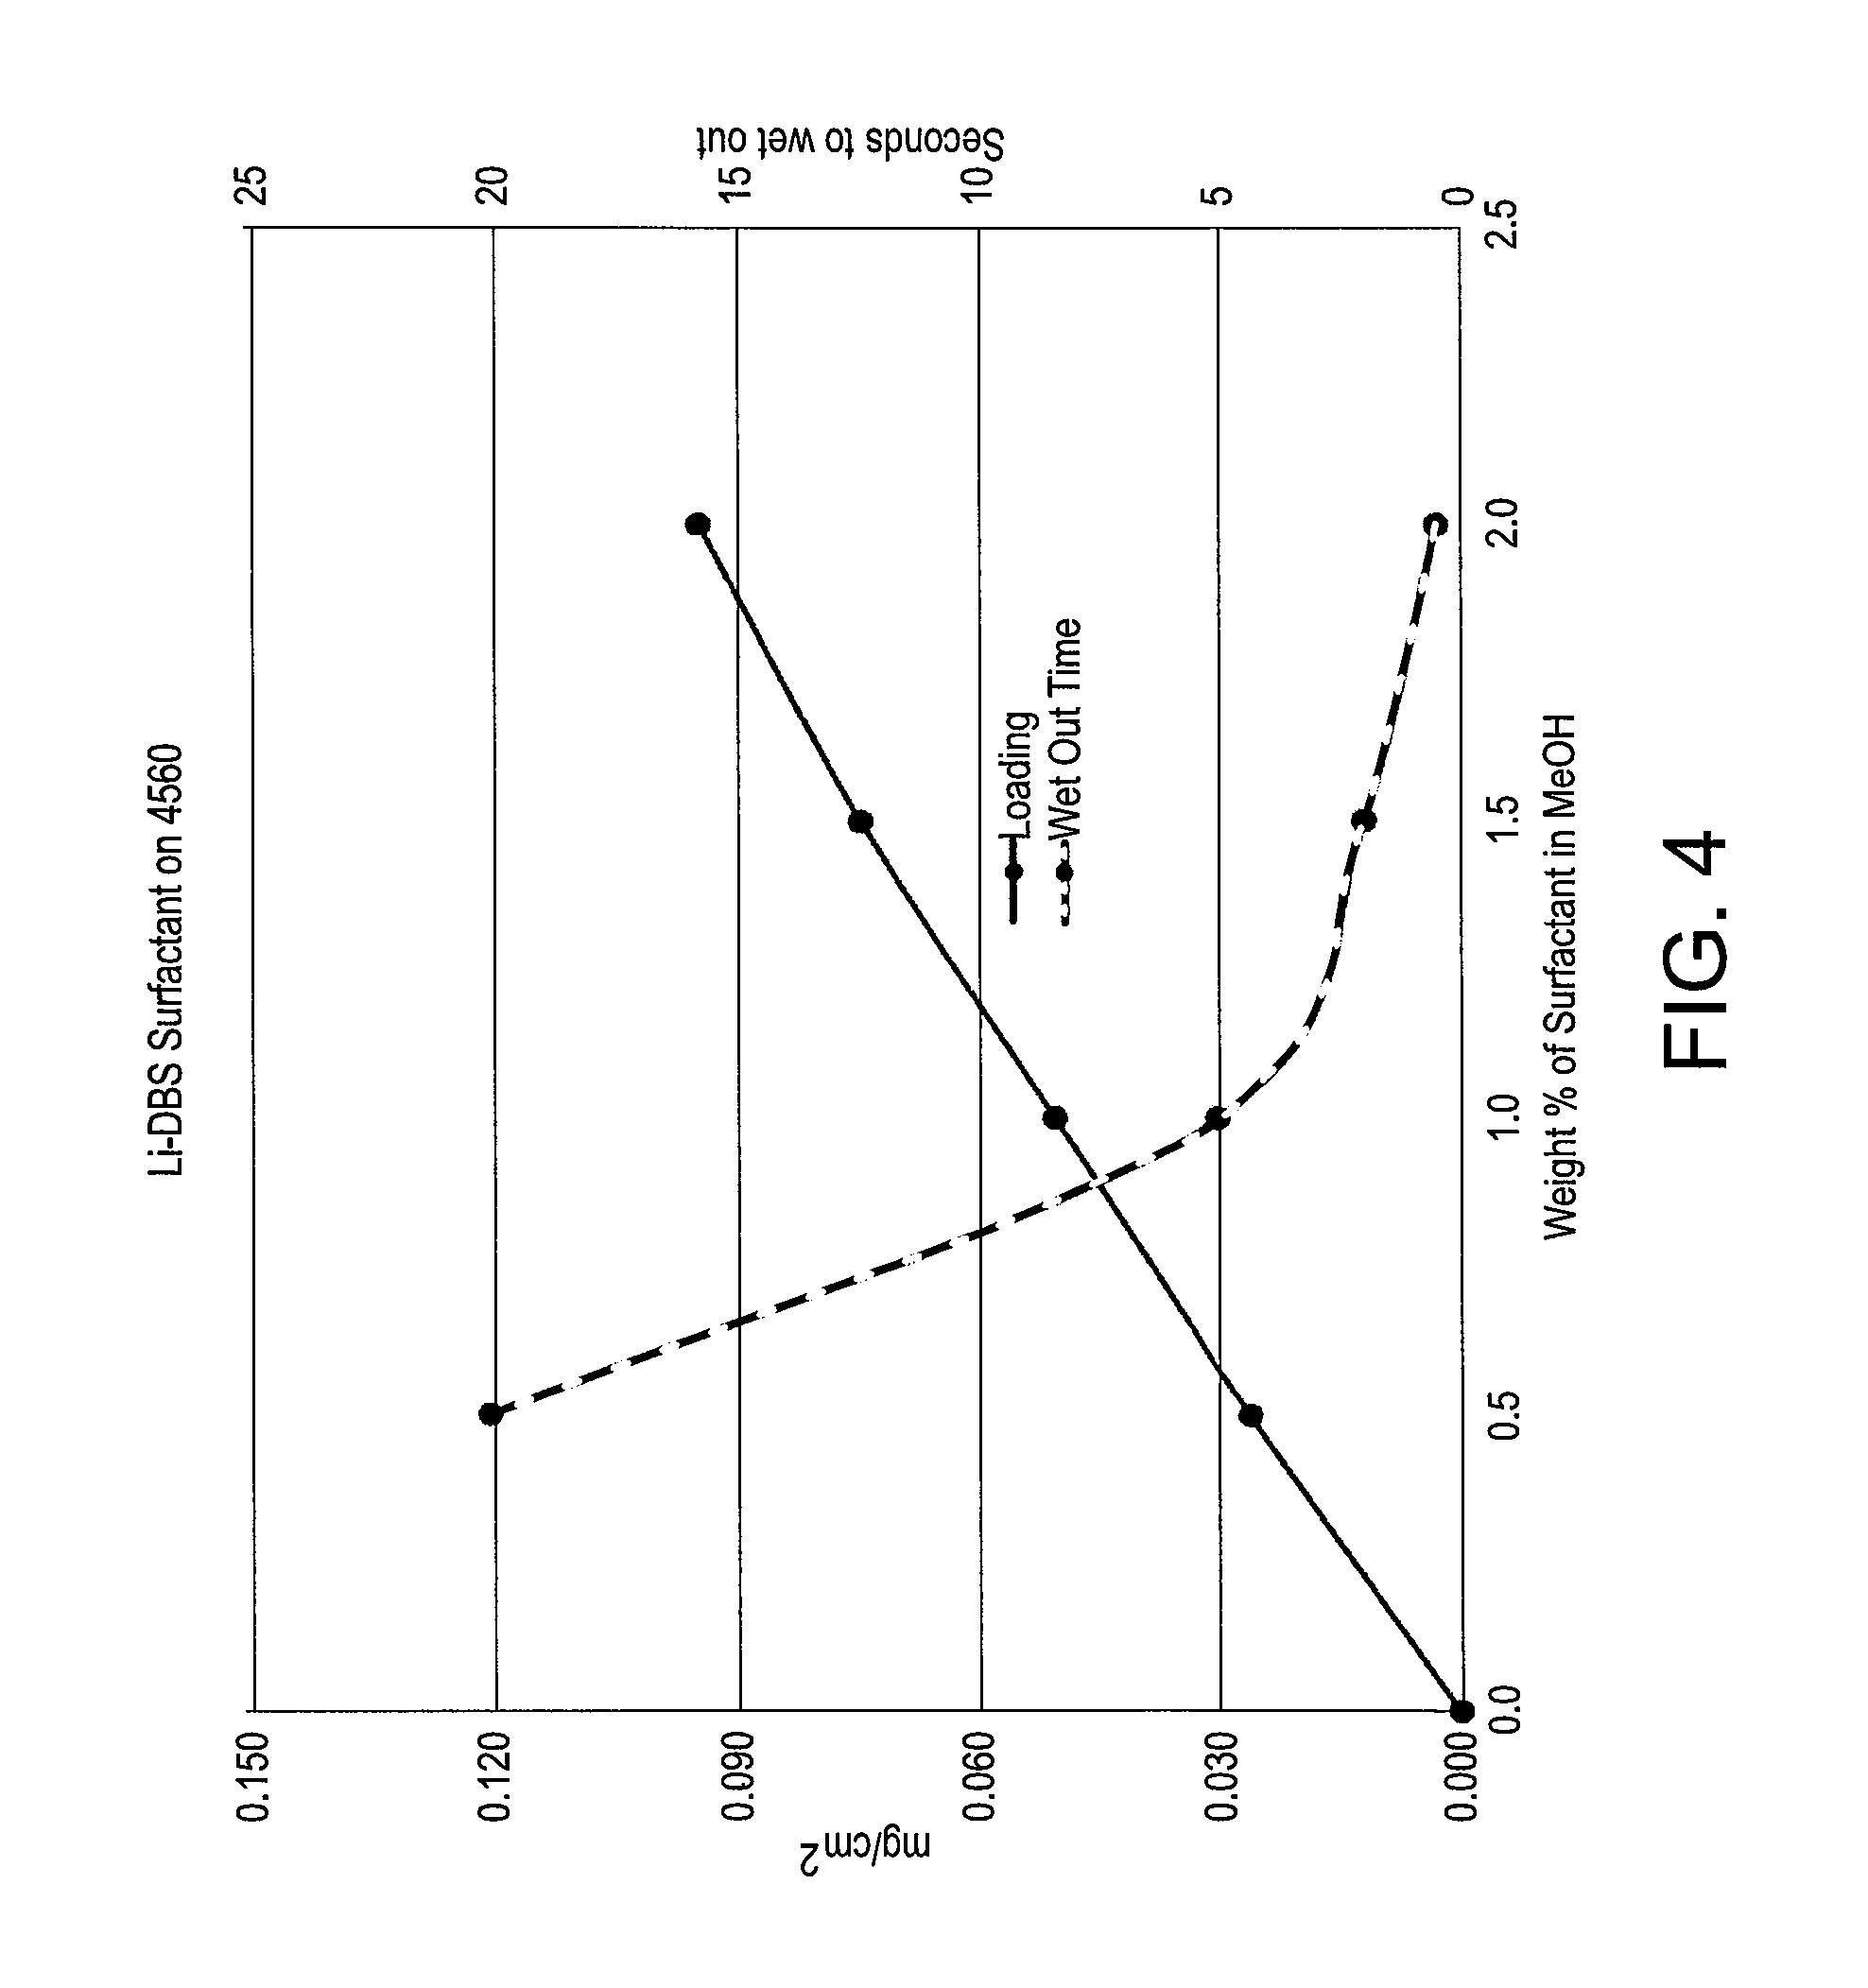 Coated or treated microporous battery separators, rechargeable lithium batteries, systems, and related methods of manufacture and/or use